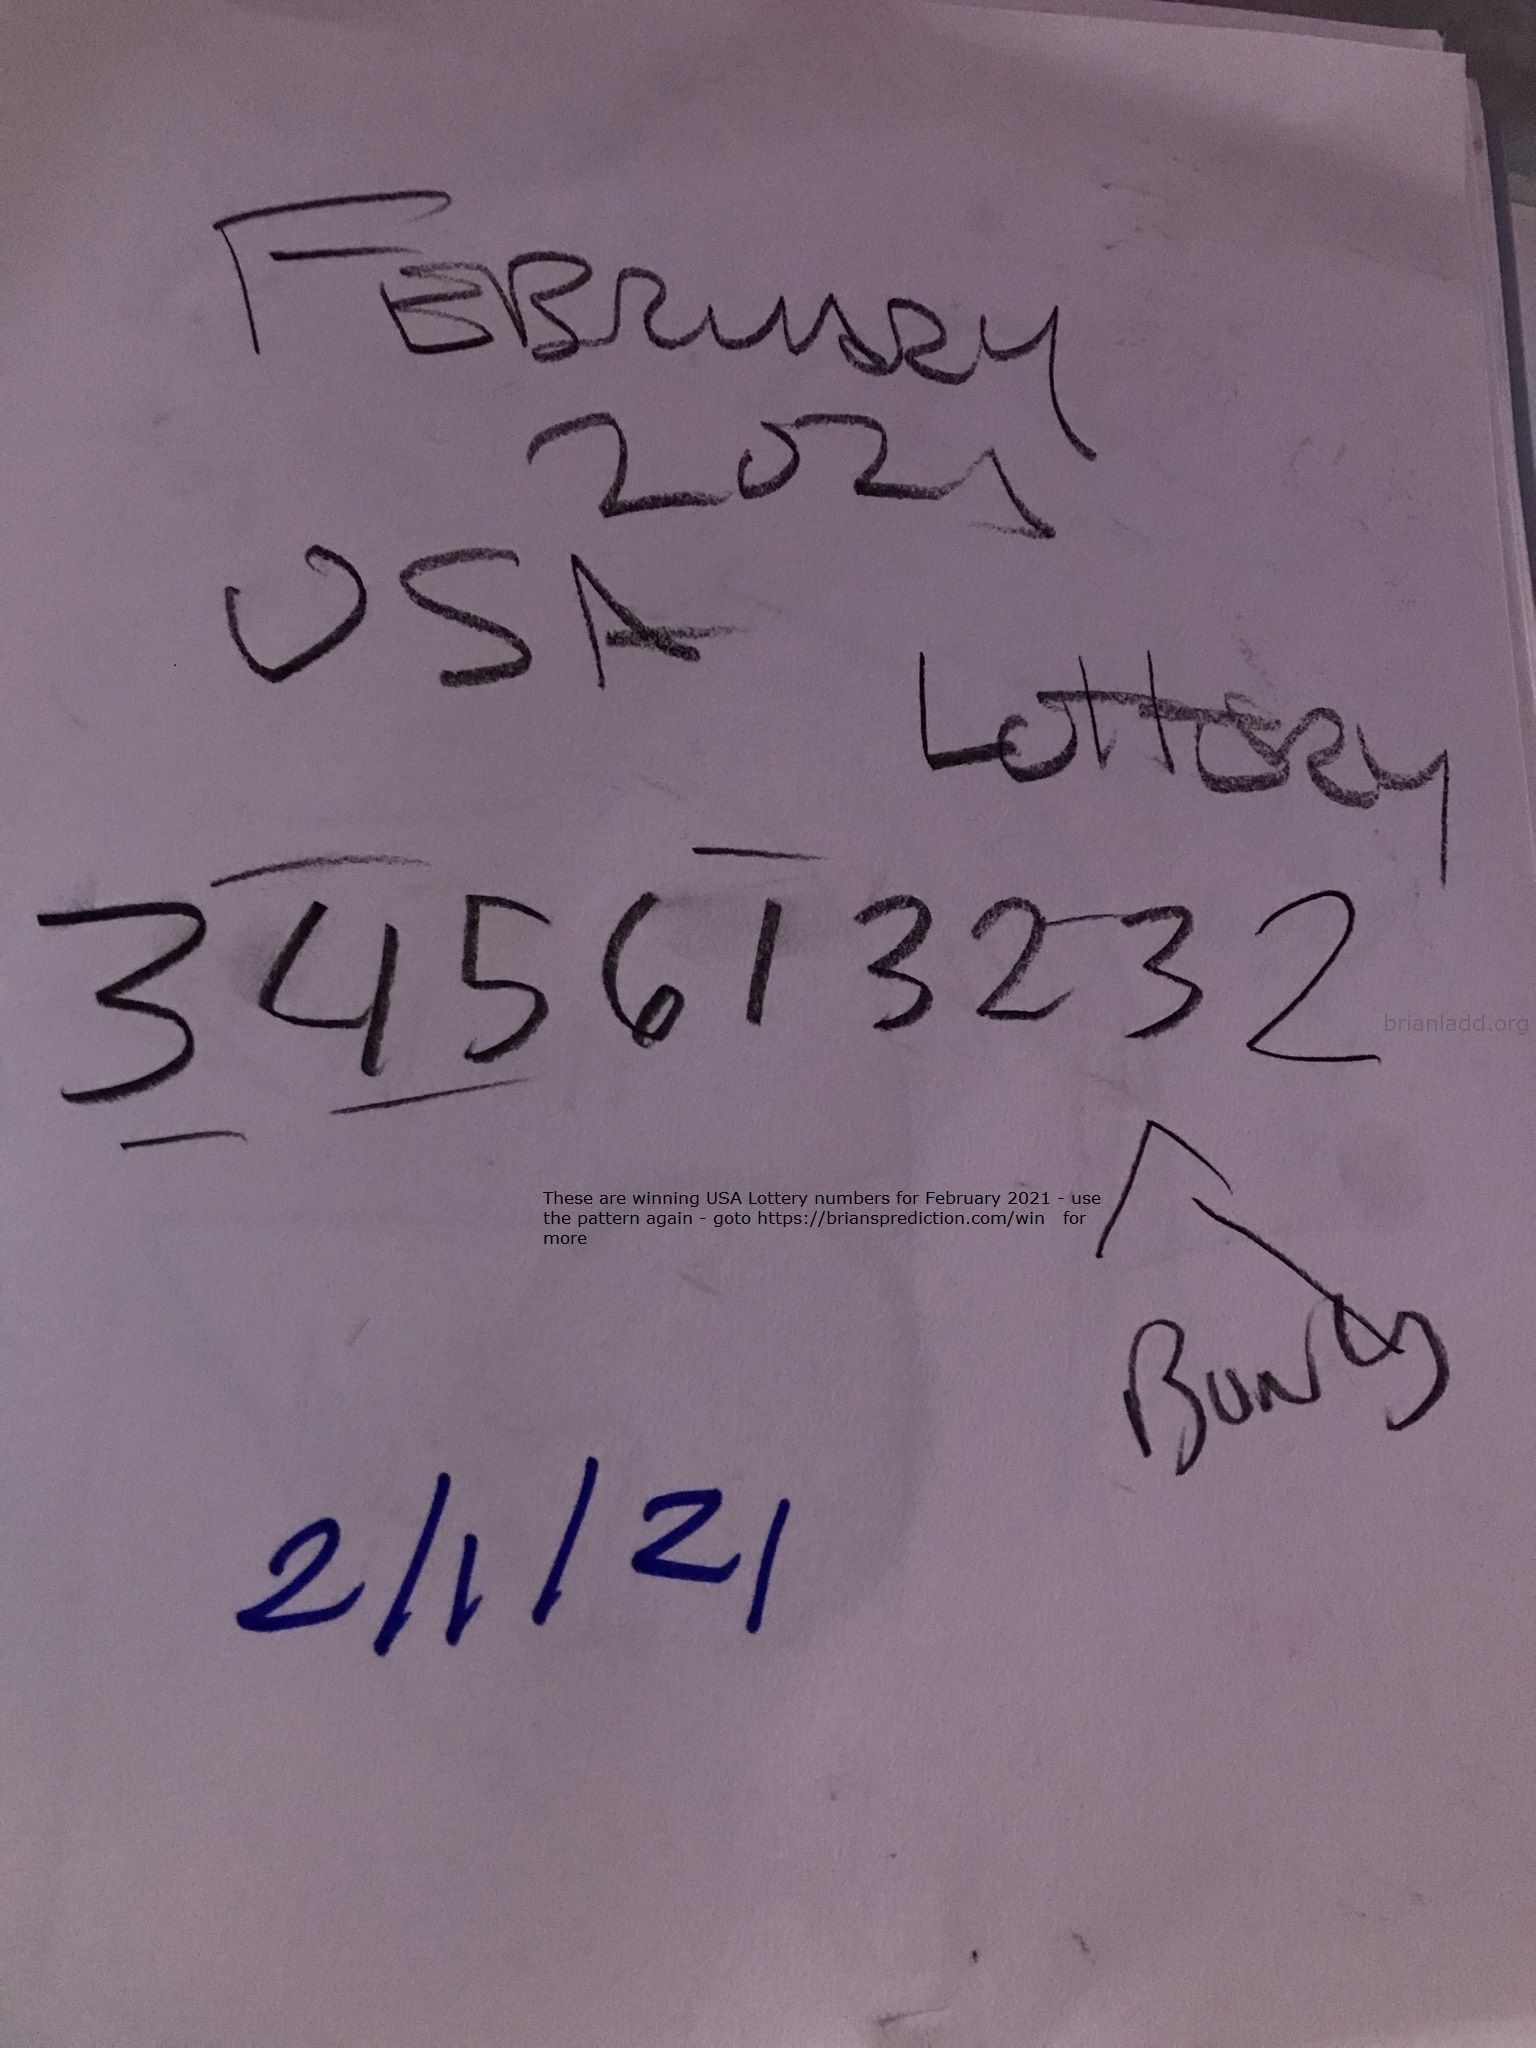 14395 1 February 2021 7 - These Are Winning Usa Lottery Numbers For February 2021 - Use The Pattern Again - Goto https:...
These Are Winning Usa Lottery Numbers For February 2021 - Use The Pattern Again - Goto  https://briansprediction.com/Win For More.  ( NEW!  Free lottery picks by mail, I will personally fill out your blank lottery sheet and mail it back to you for free, postage is included!  visit  https://briansprediction.com/picksbymail   )
